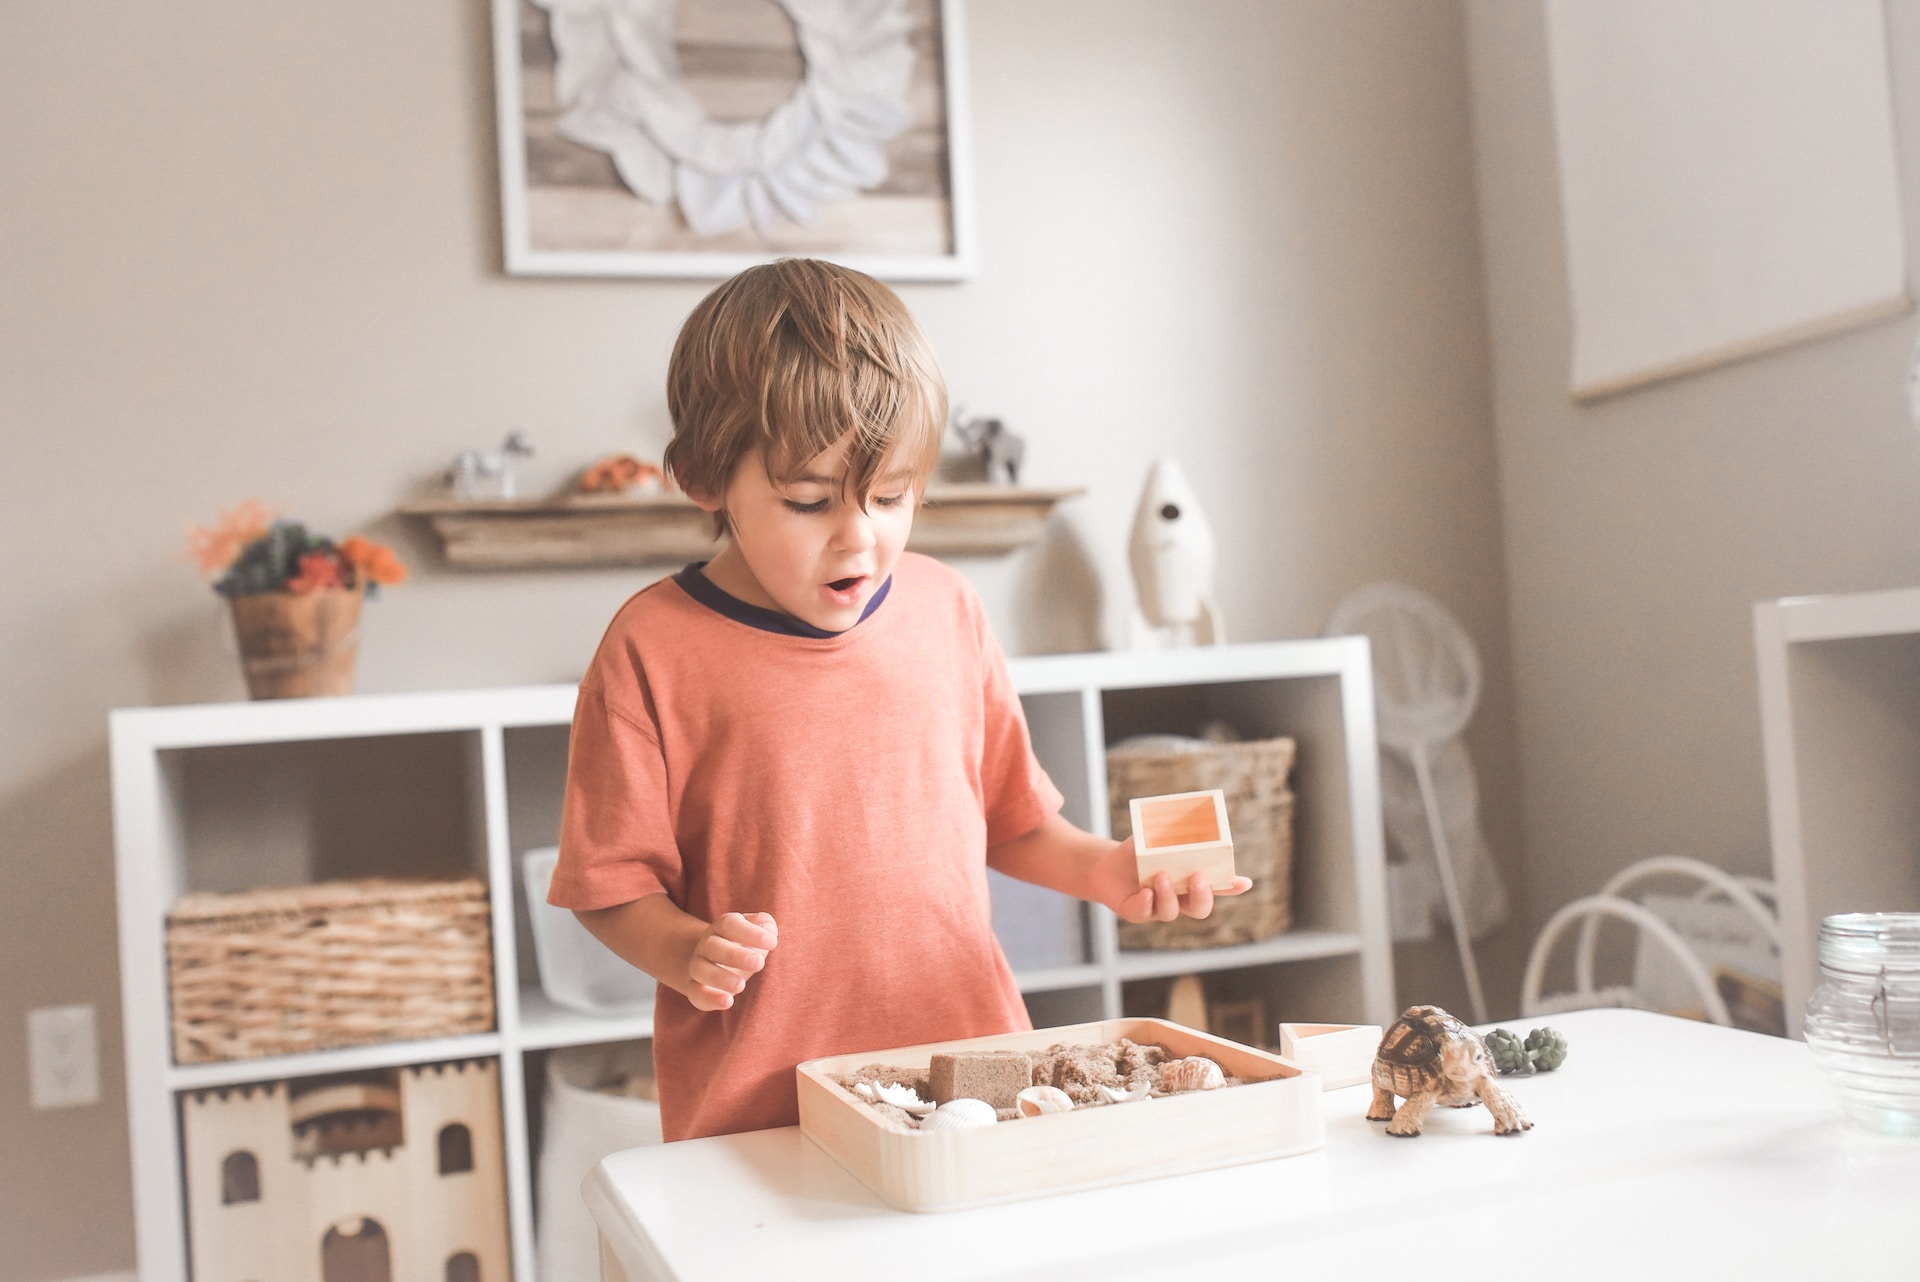 4 Amazing Benefits Associated With Children Building Their Own Collections